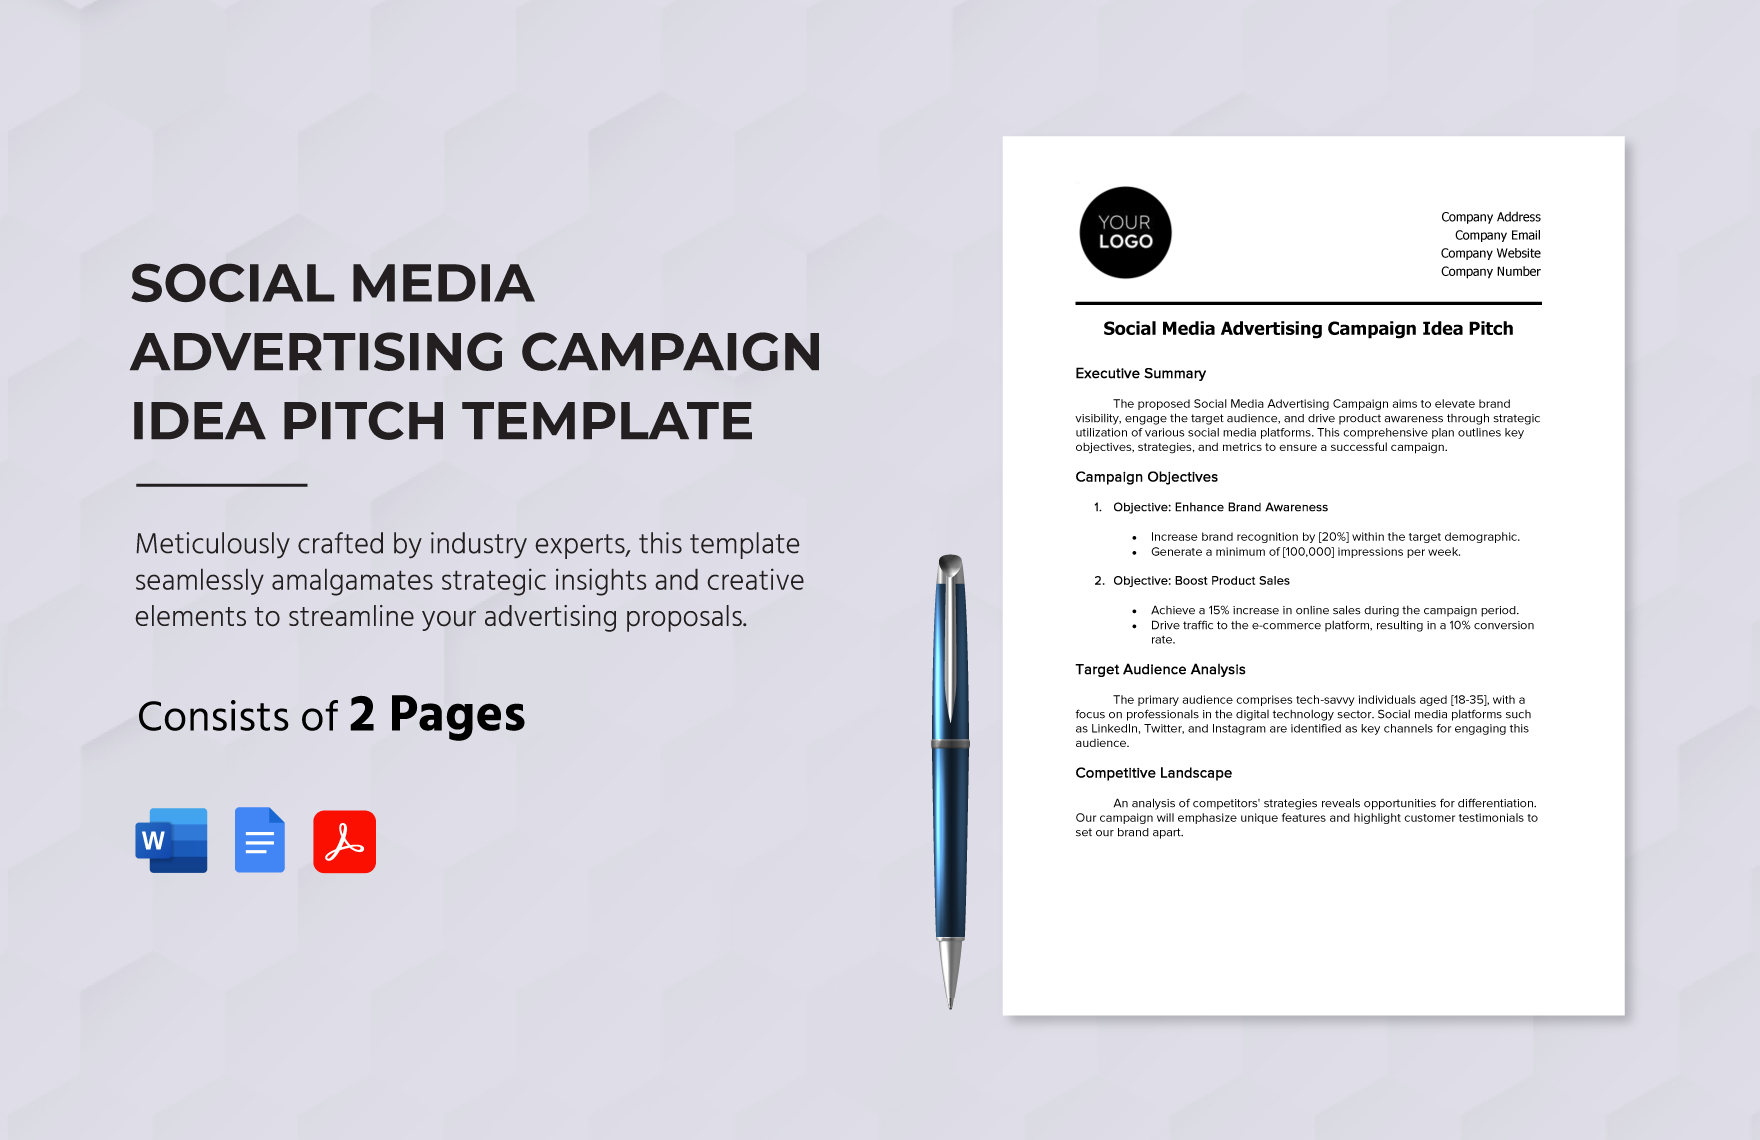 Social Media Advertising Campaign Idea Pitch Template